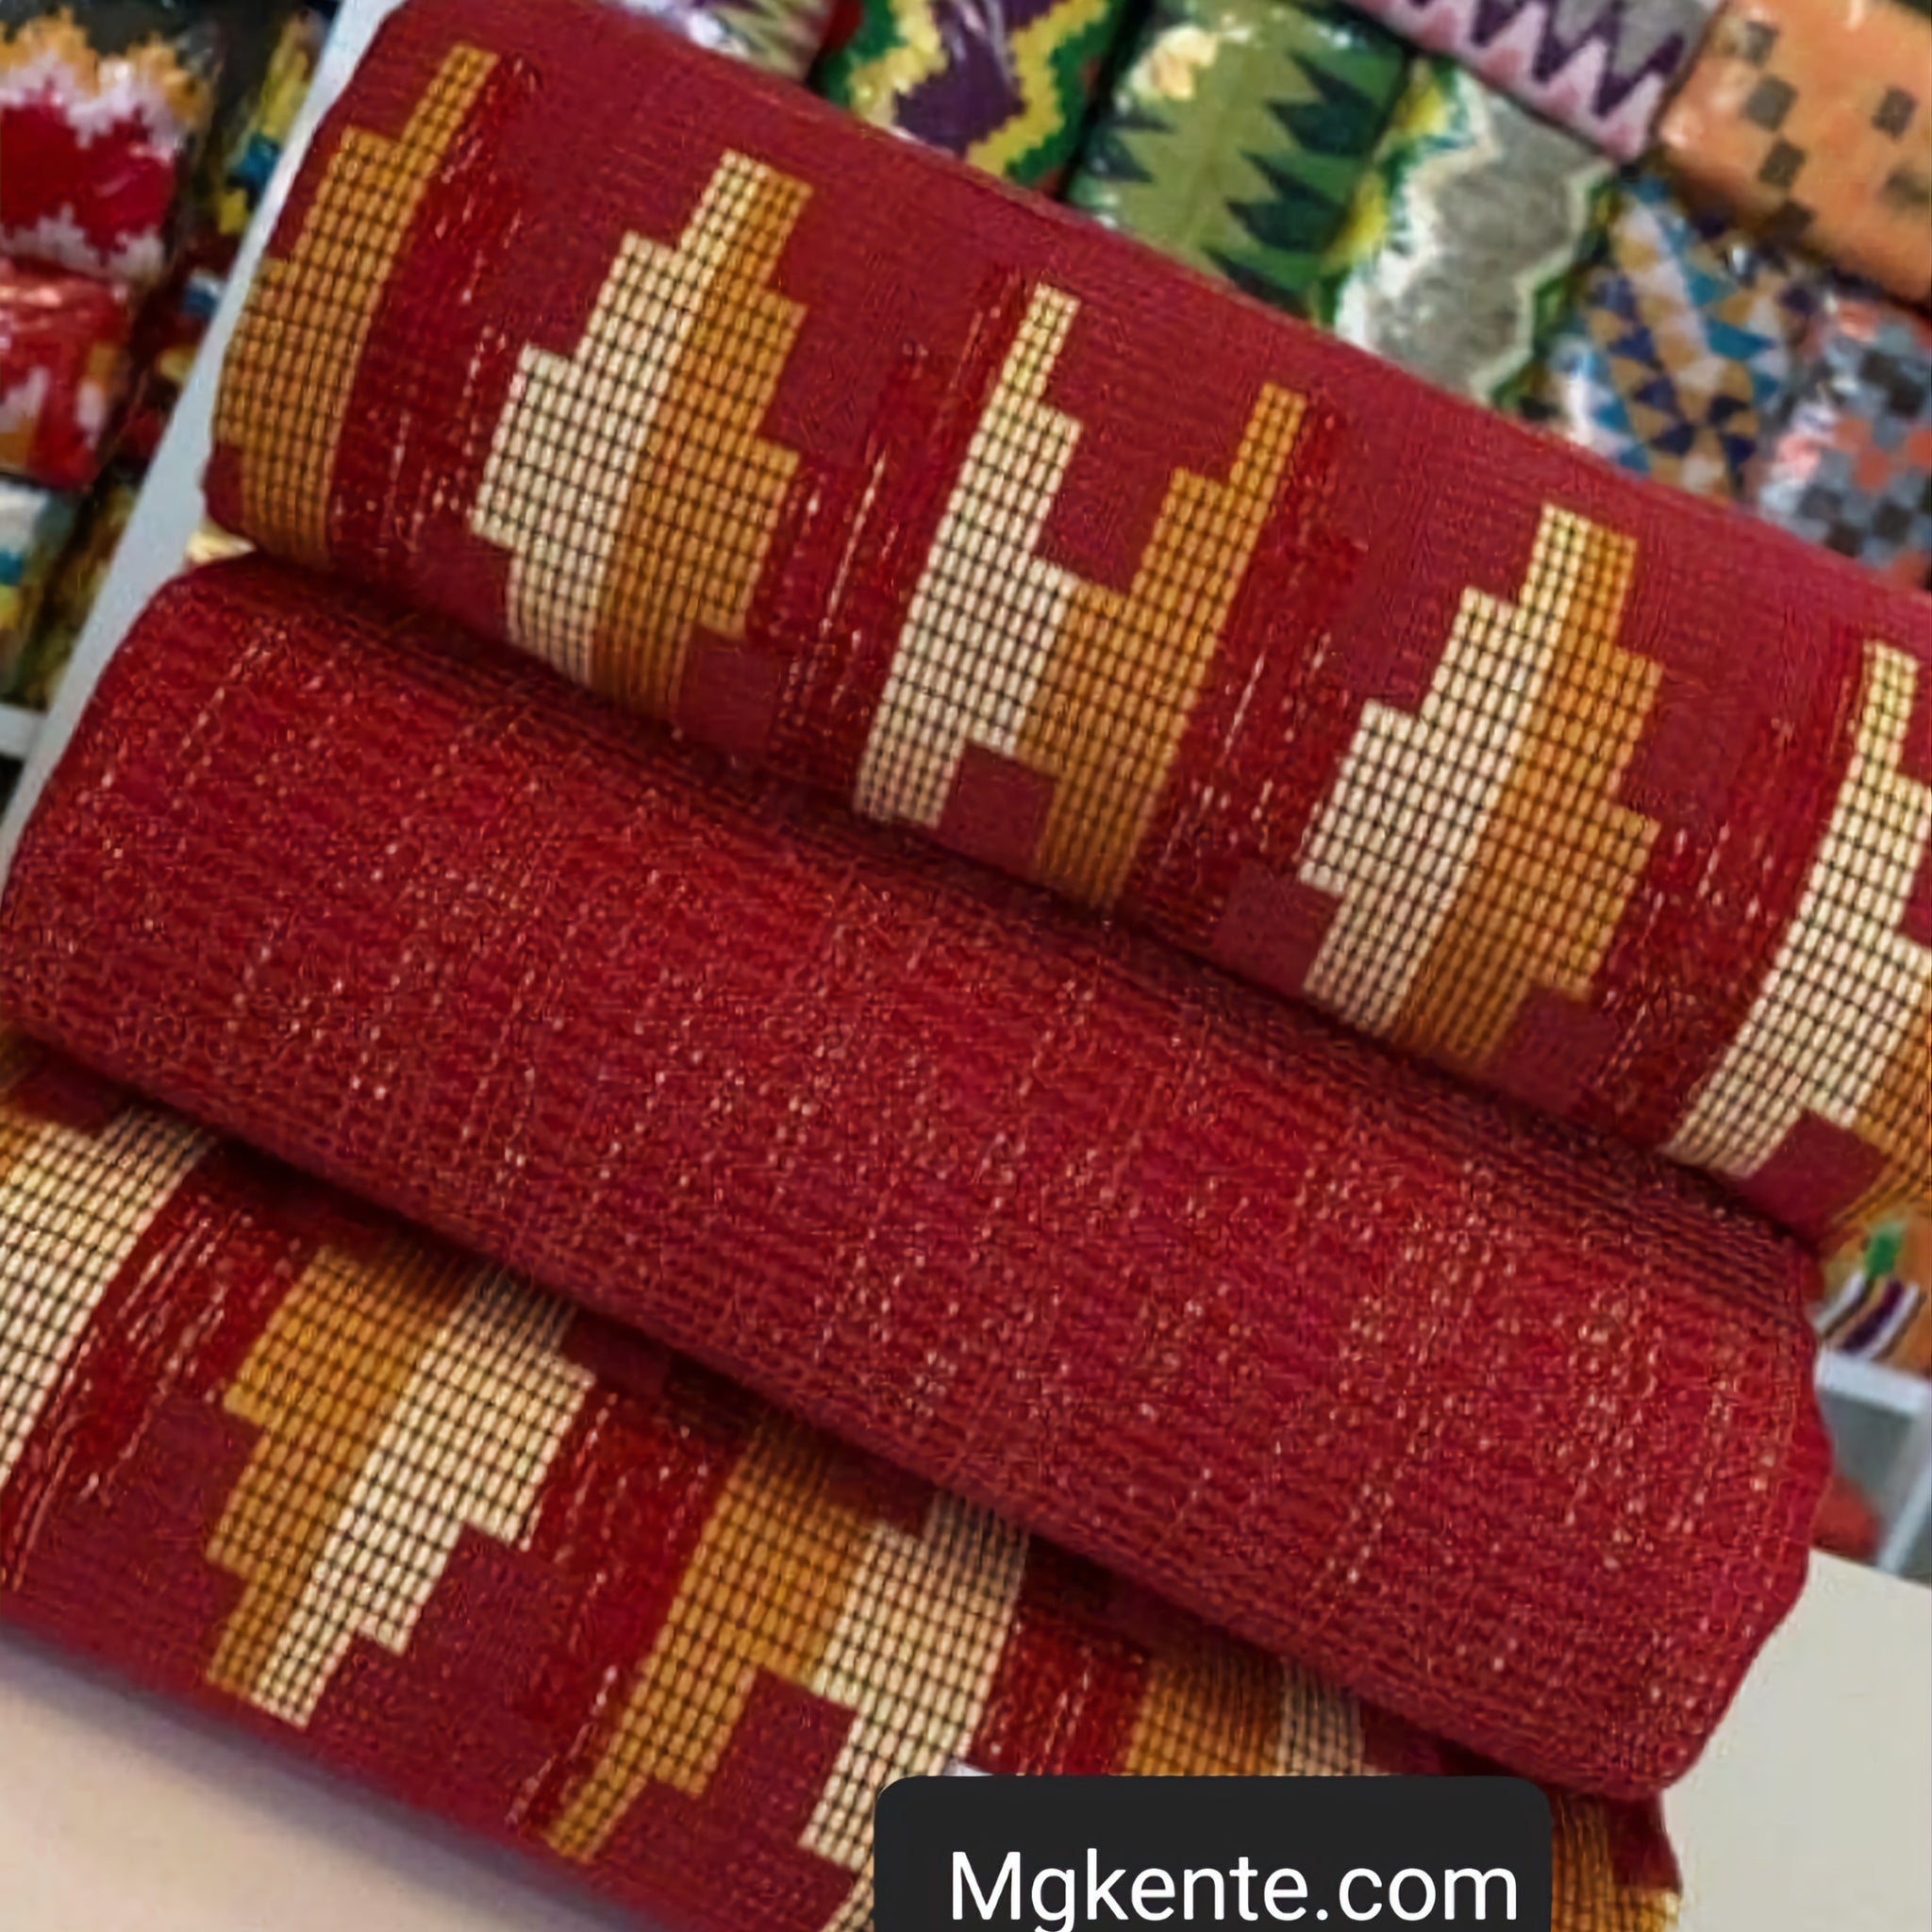 MG Authentic Hand Weaved Kente Cloth A2676